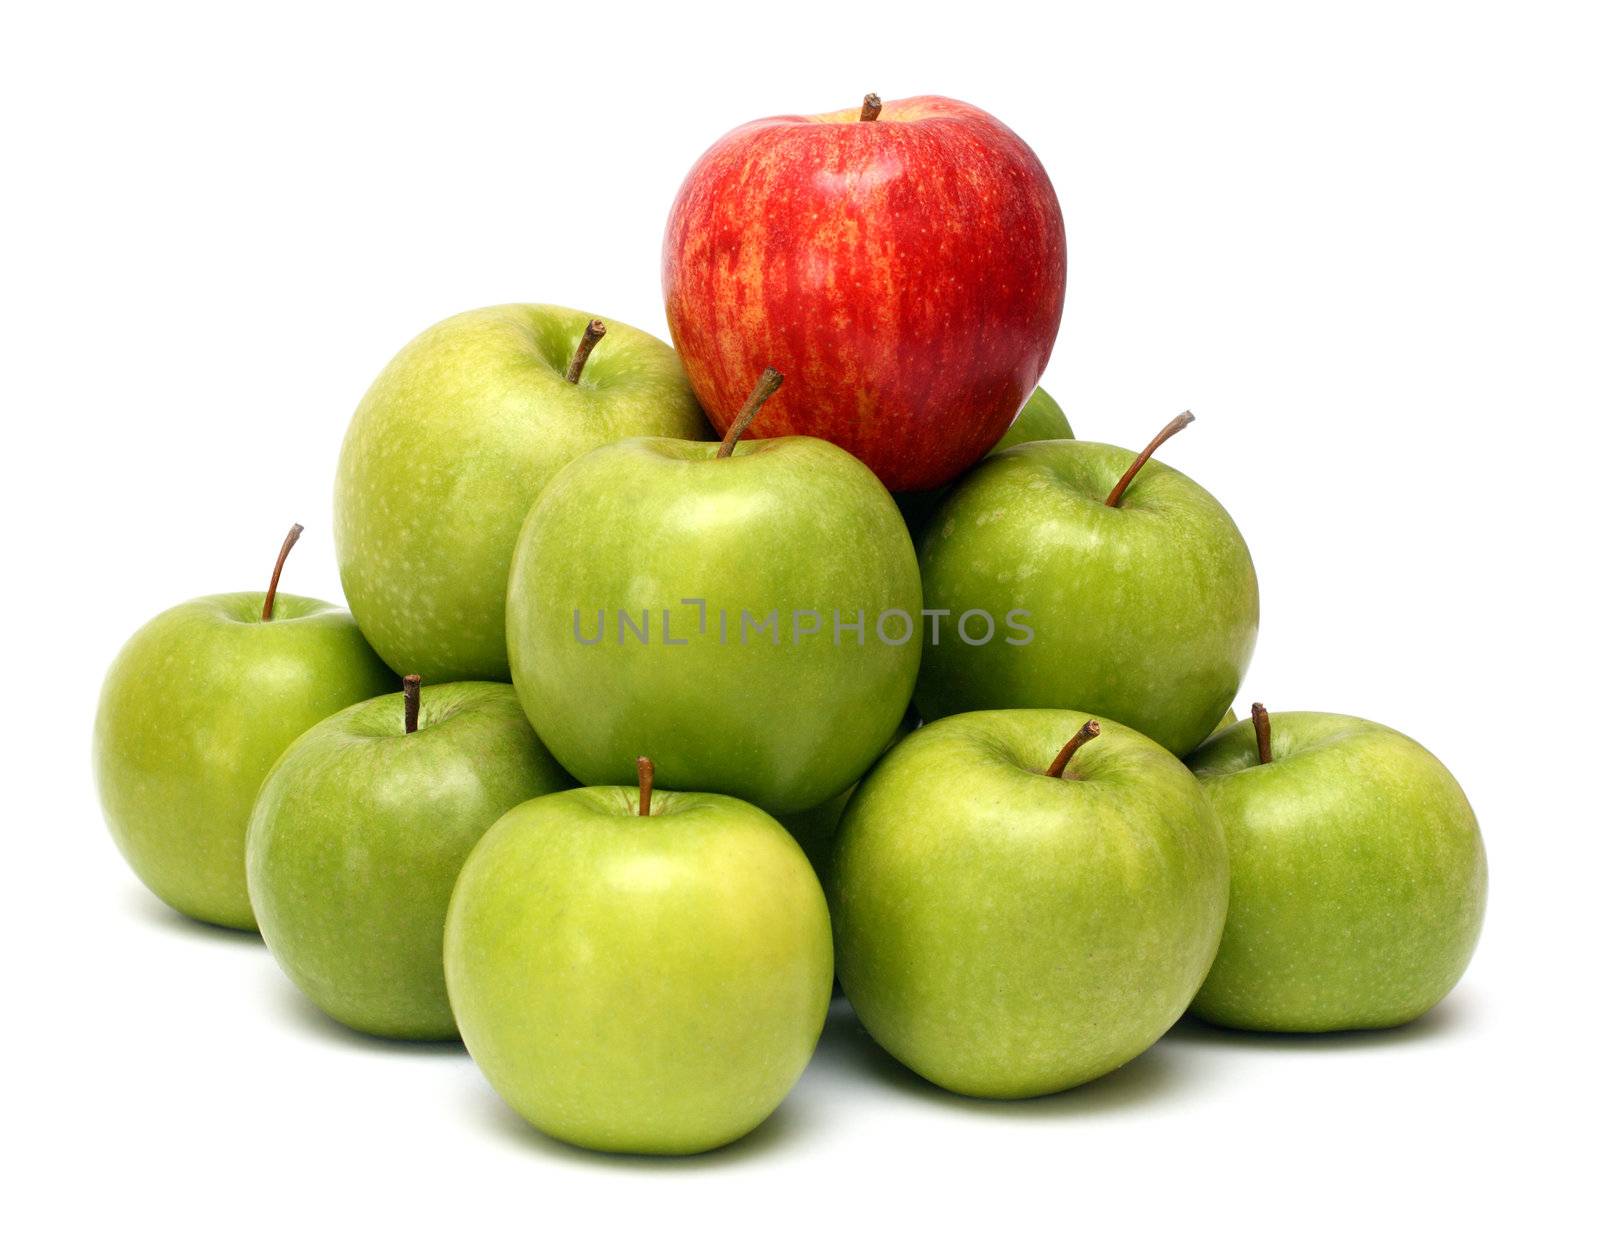 domination concepts with apples by Mikko